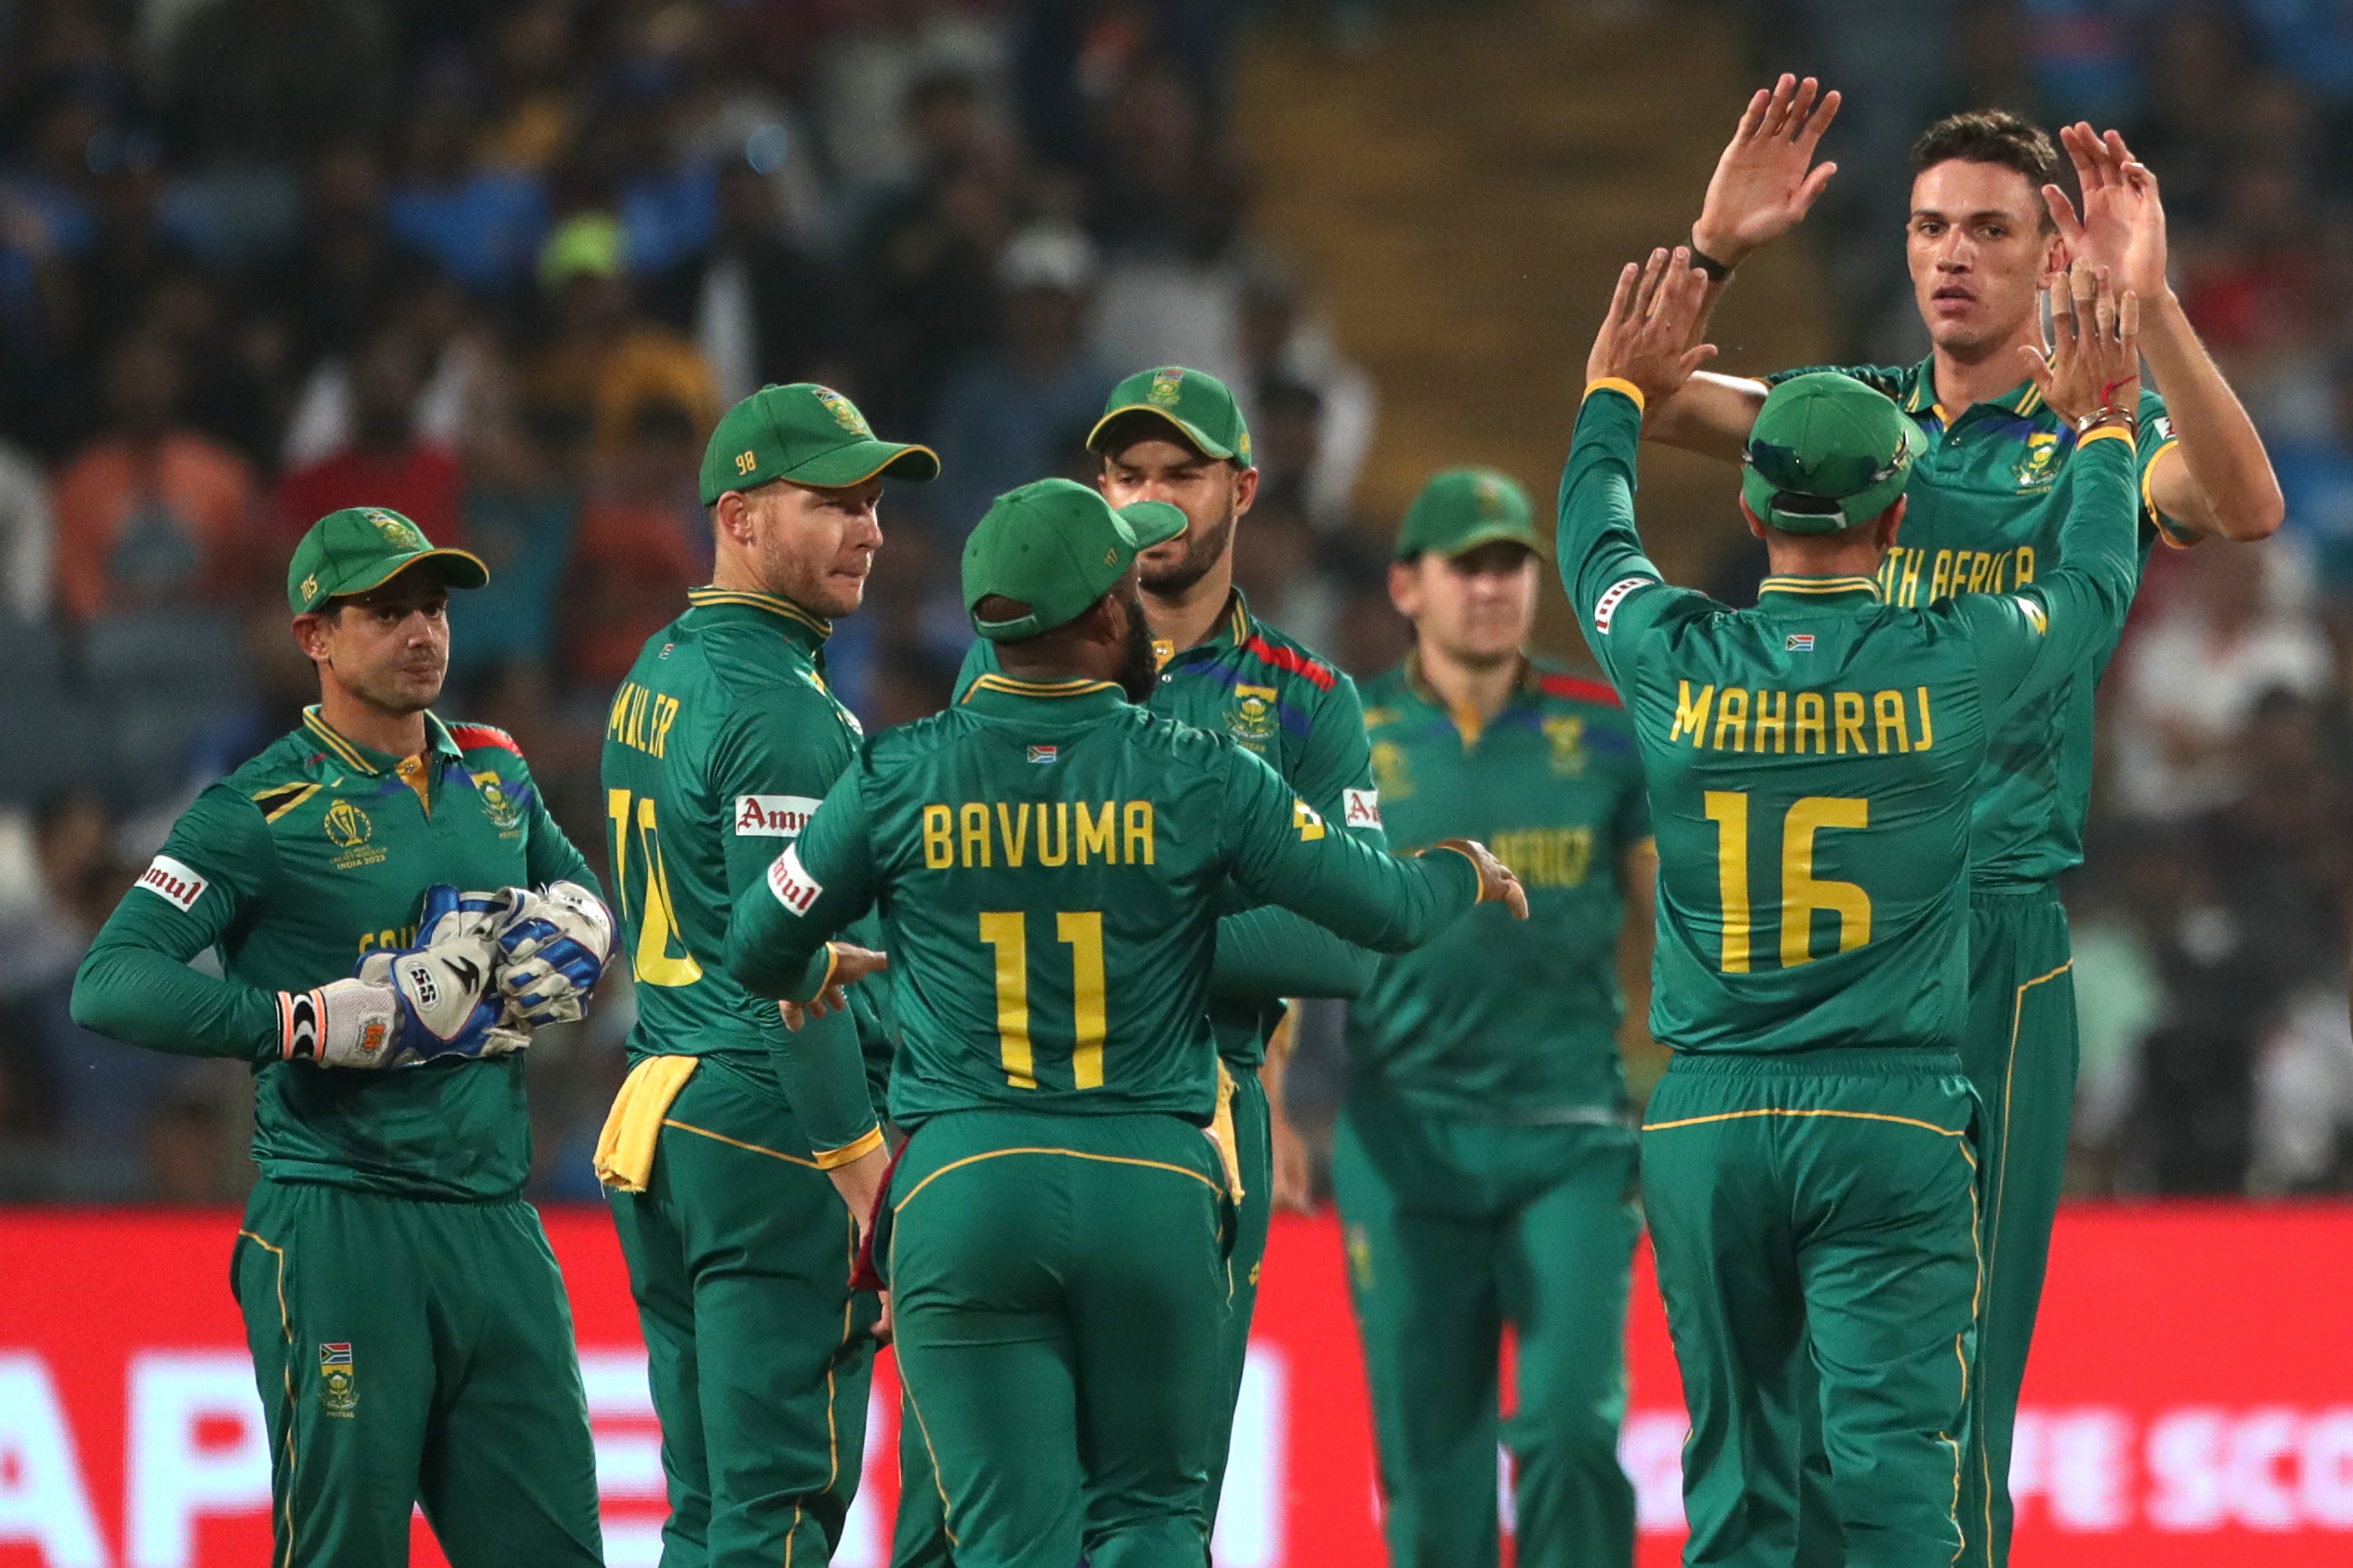 Marco Jansen of South Africa celebrates the wicket of New Zealand’s Tim Southee